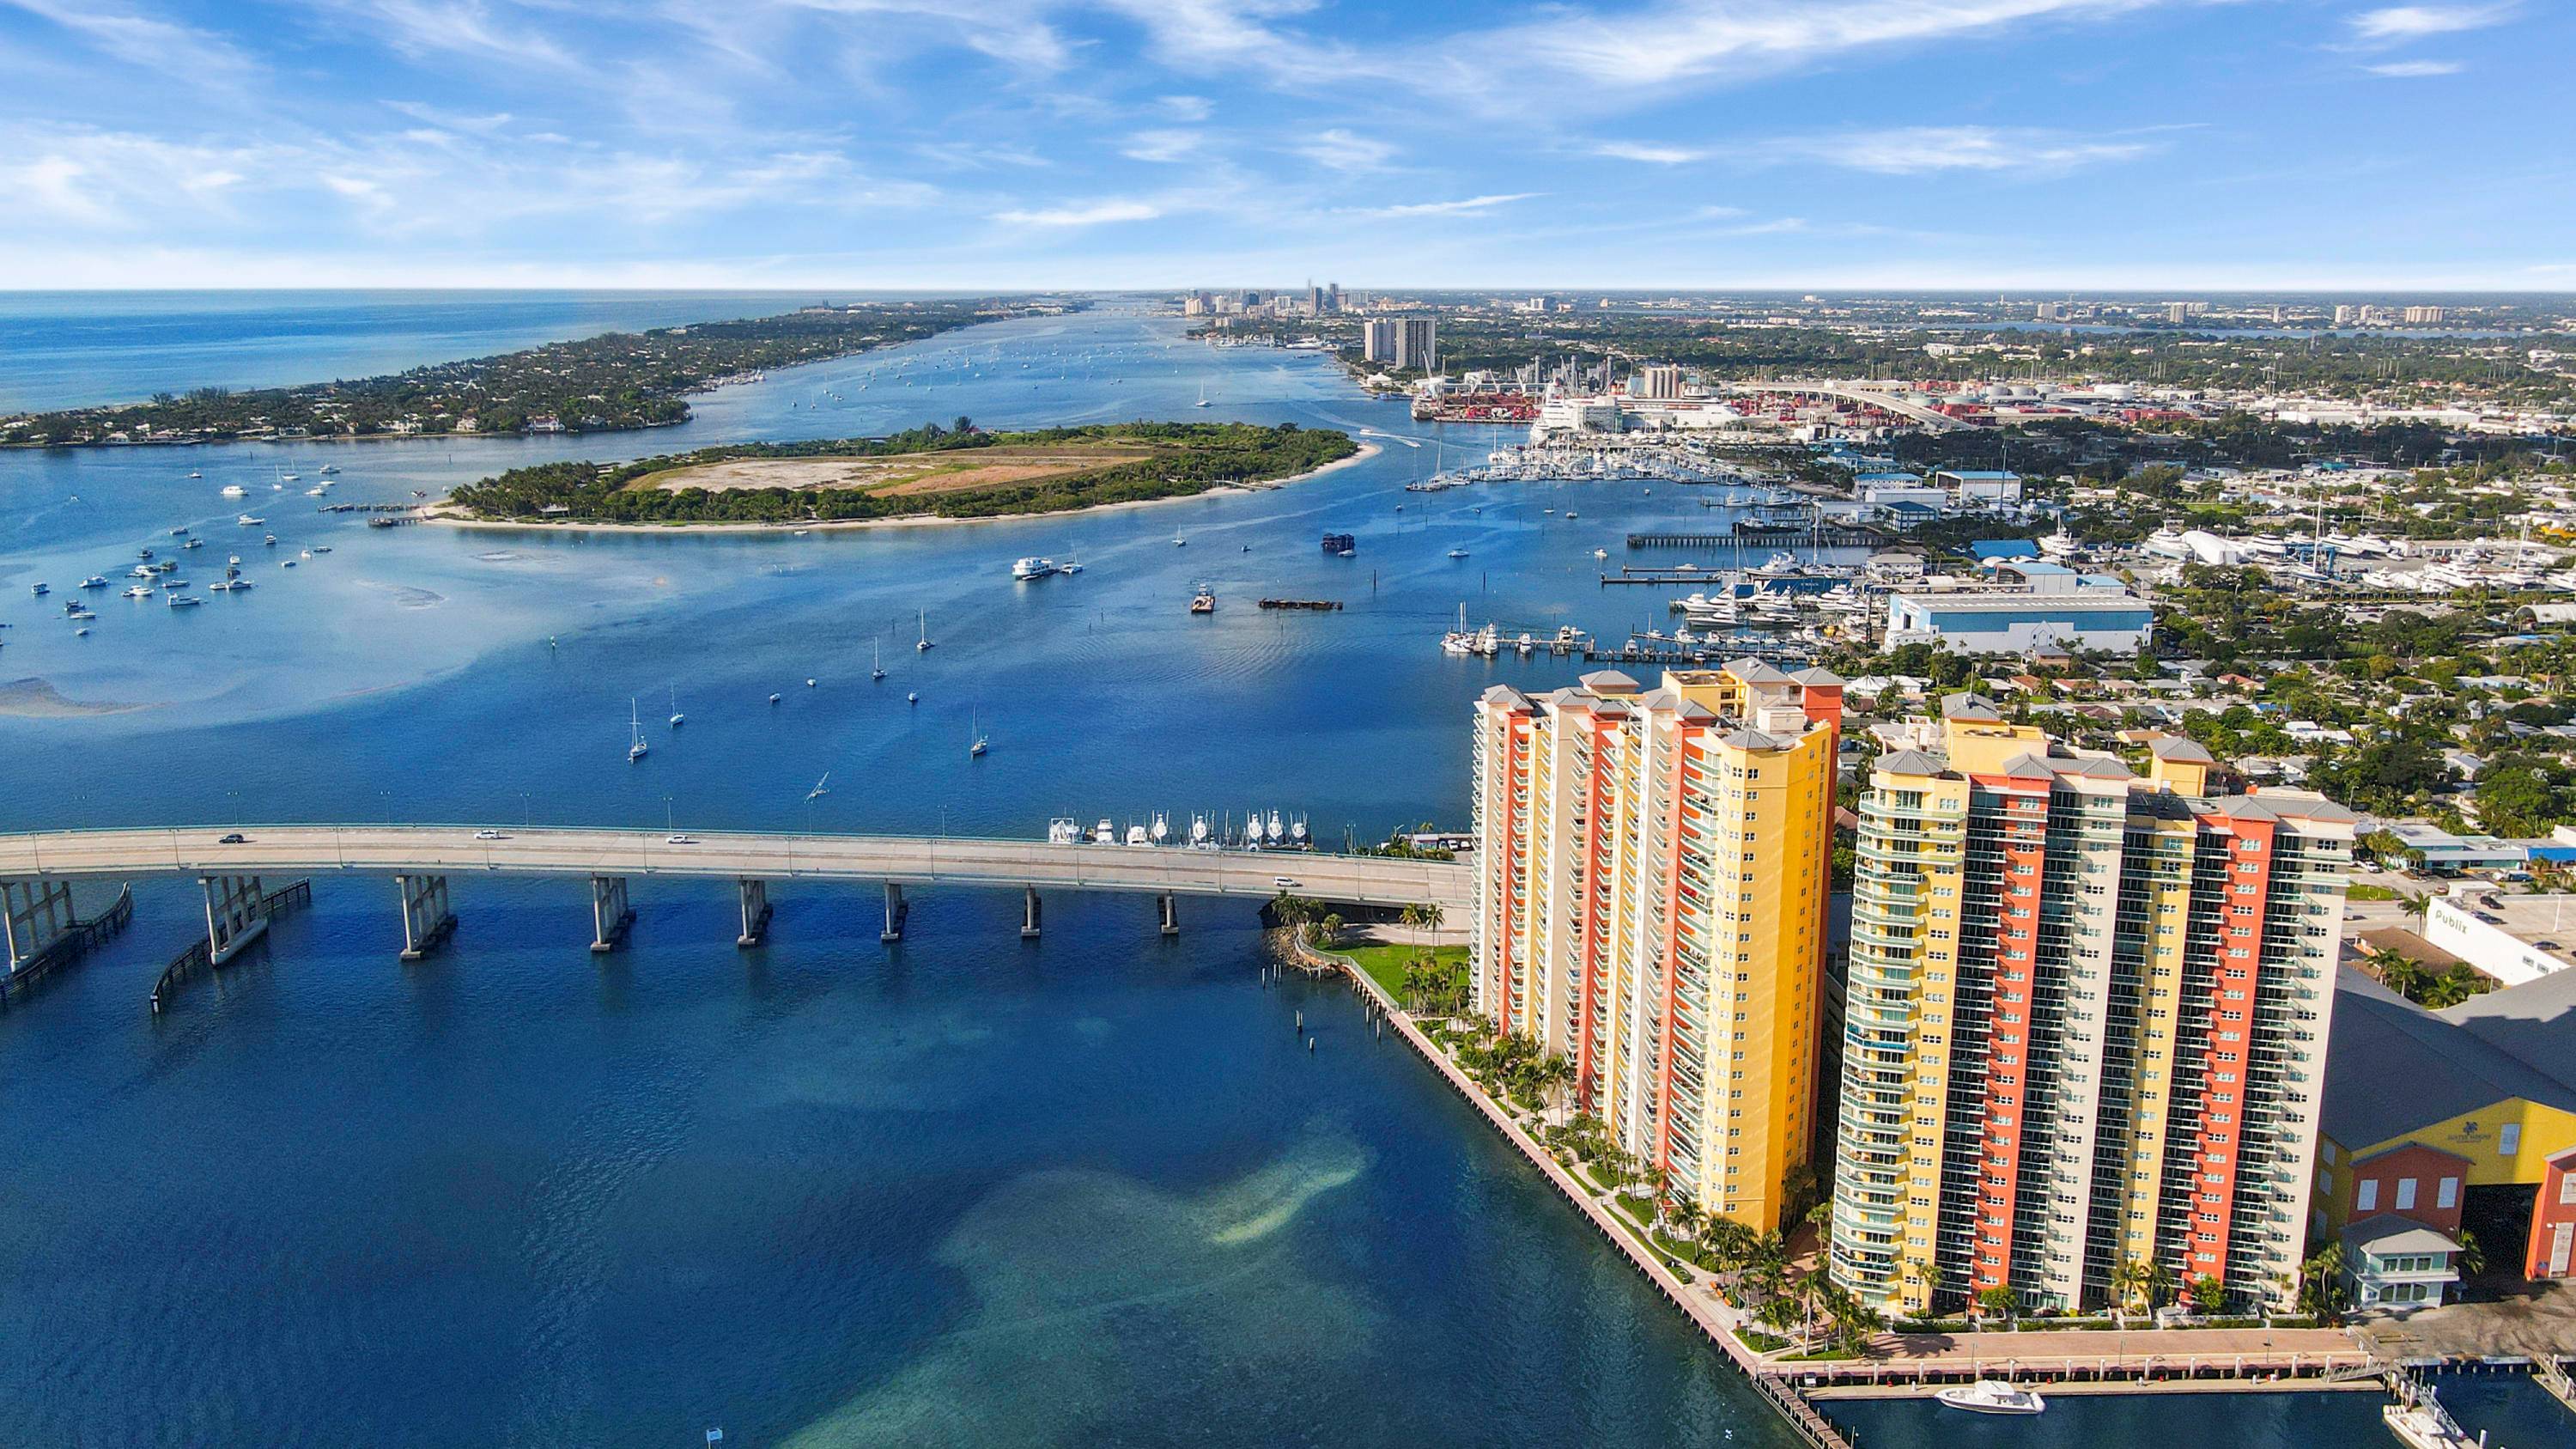 SPECTACULAR CORNER UNIT WITH DIRECT EAST OCEAN VIEWS, SOUTH INTRACOASTAL VIEWS, WEST NORTH VIEWS, MILLION DOLLAR VIEWS MOST SOUGHT AFTER CORNER UNIT AVAILABLE New Roof, New Pool, New Tennis courts.